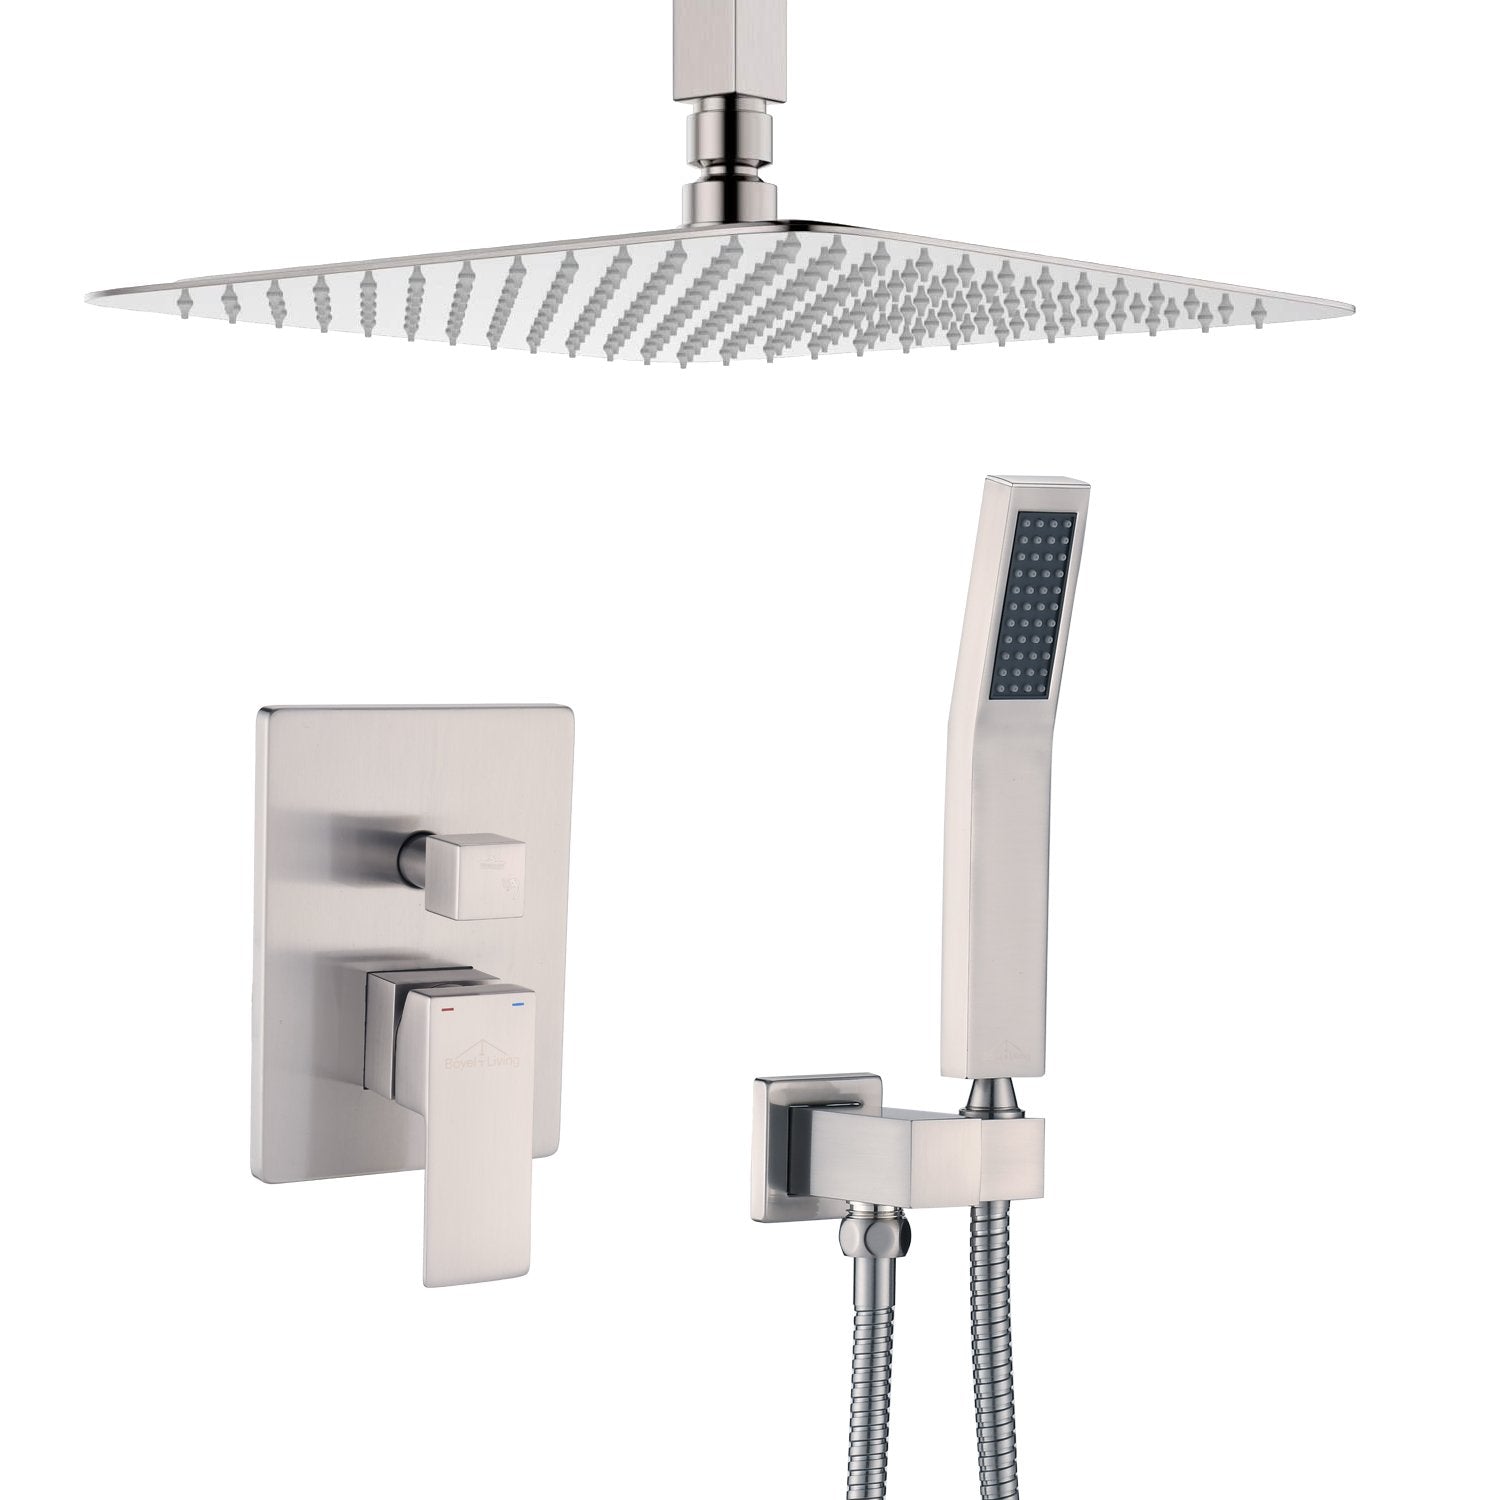 1-Spray Patterns with 2.5 GPM Ceiling Mount Dual Shower Heads- Valve Included